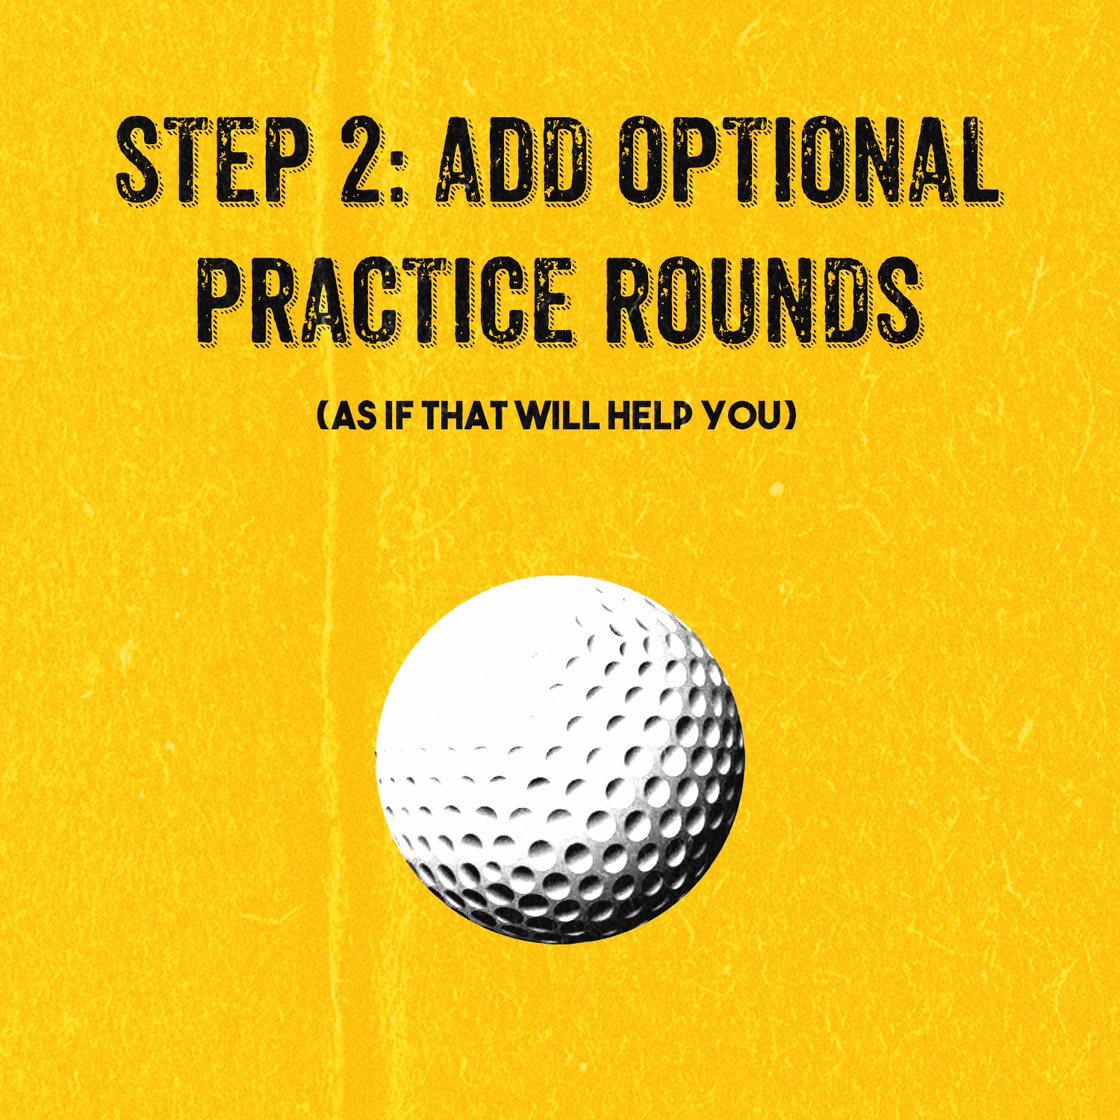 Image of STEP 2: Add Practice Rounds